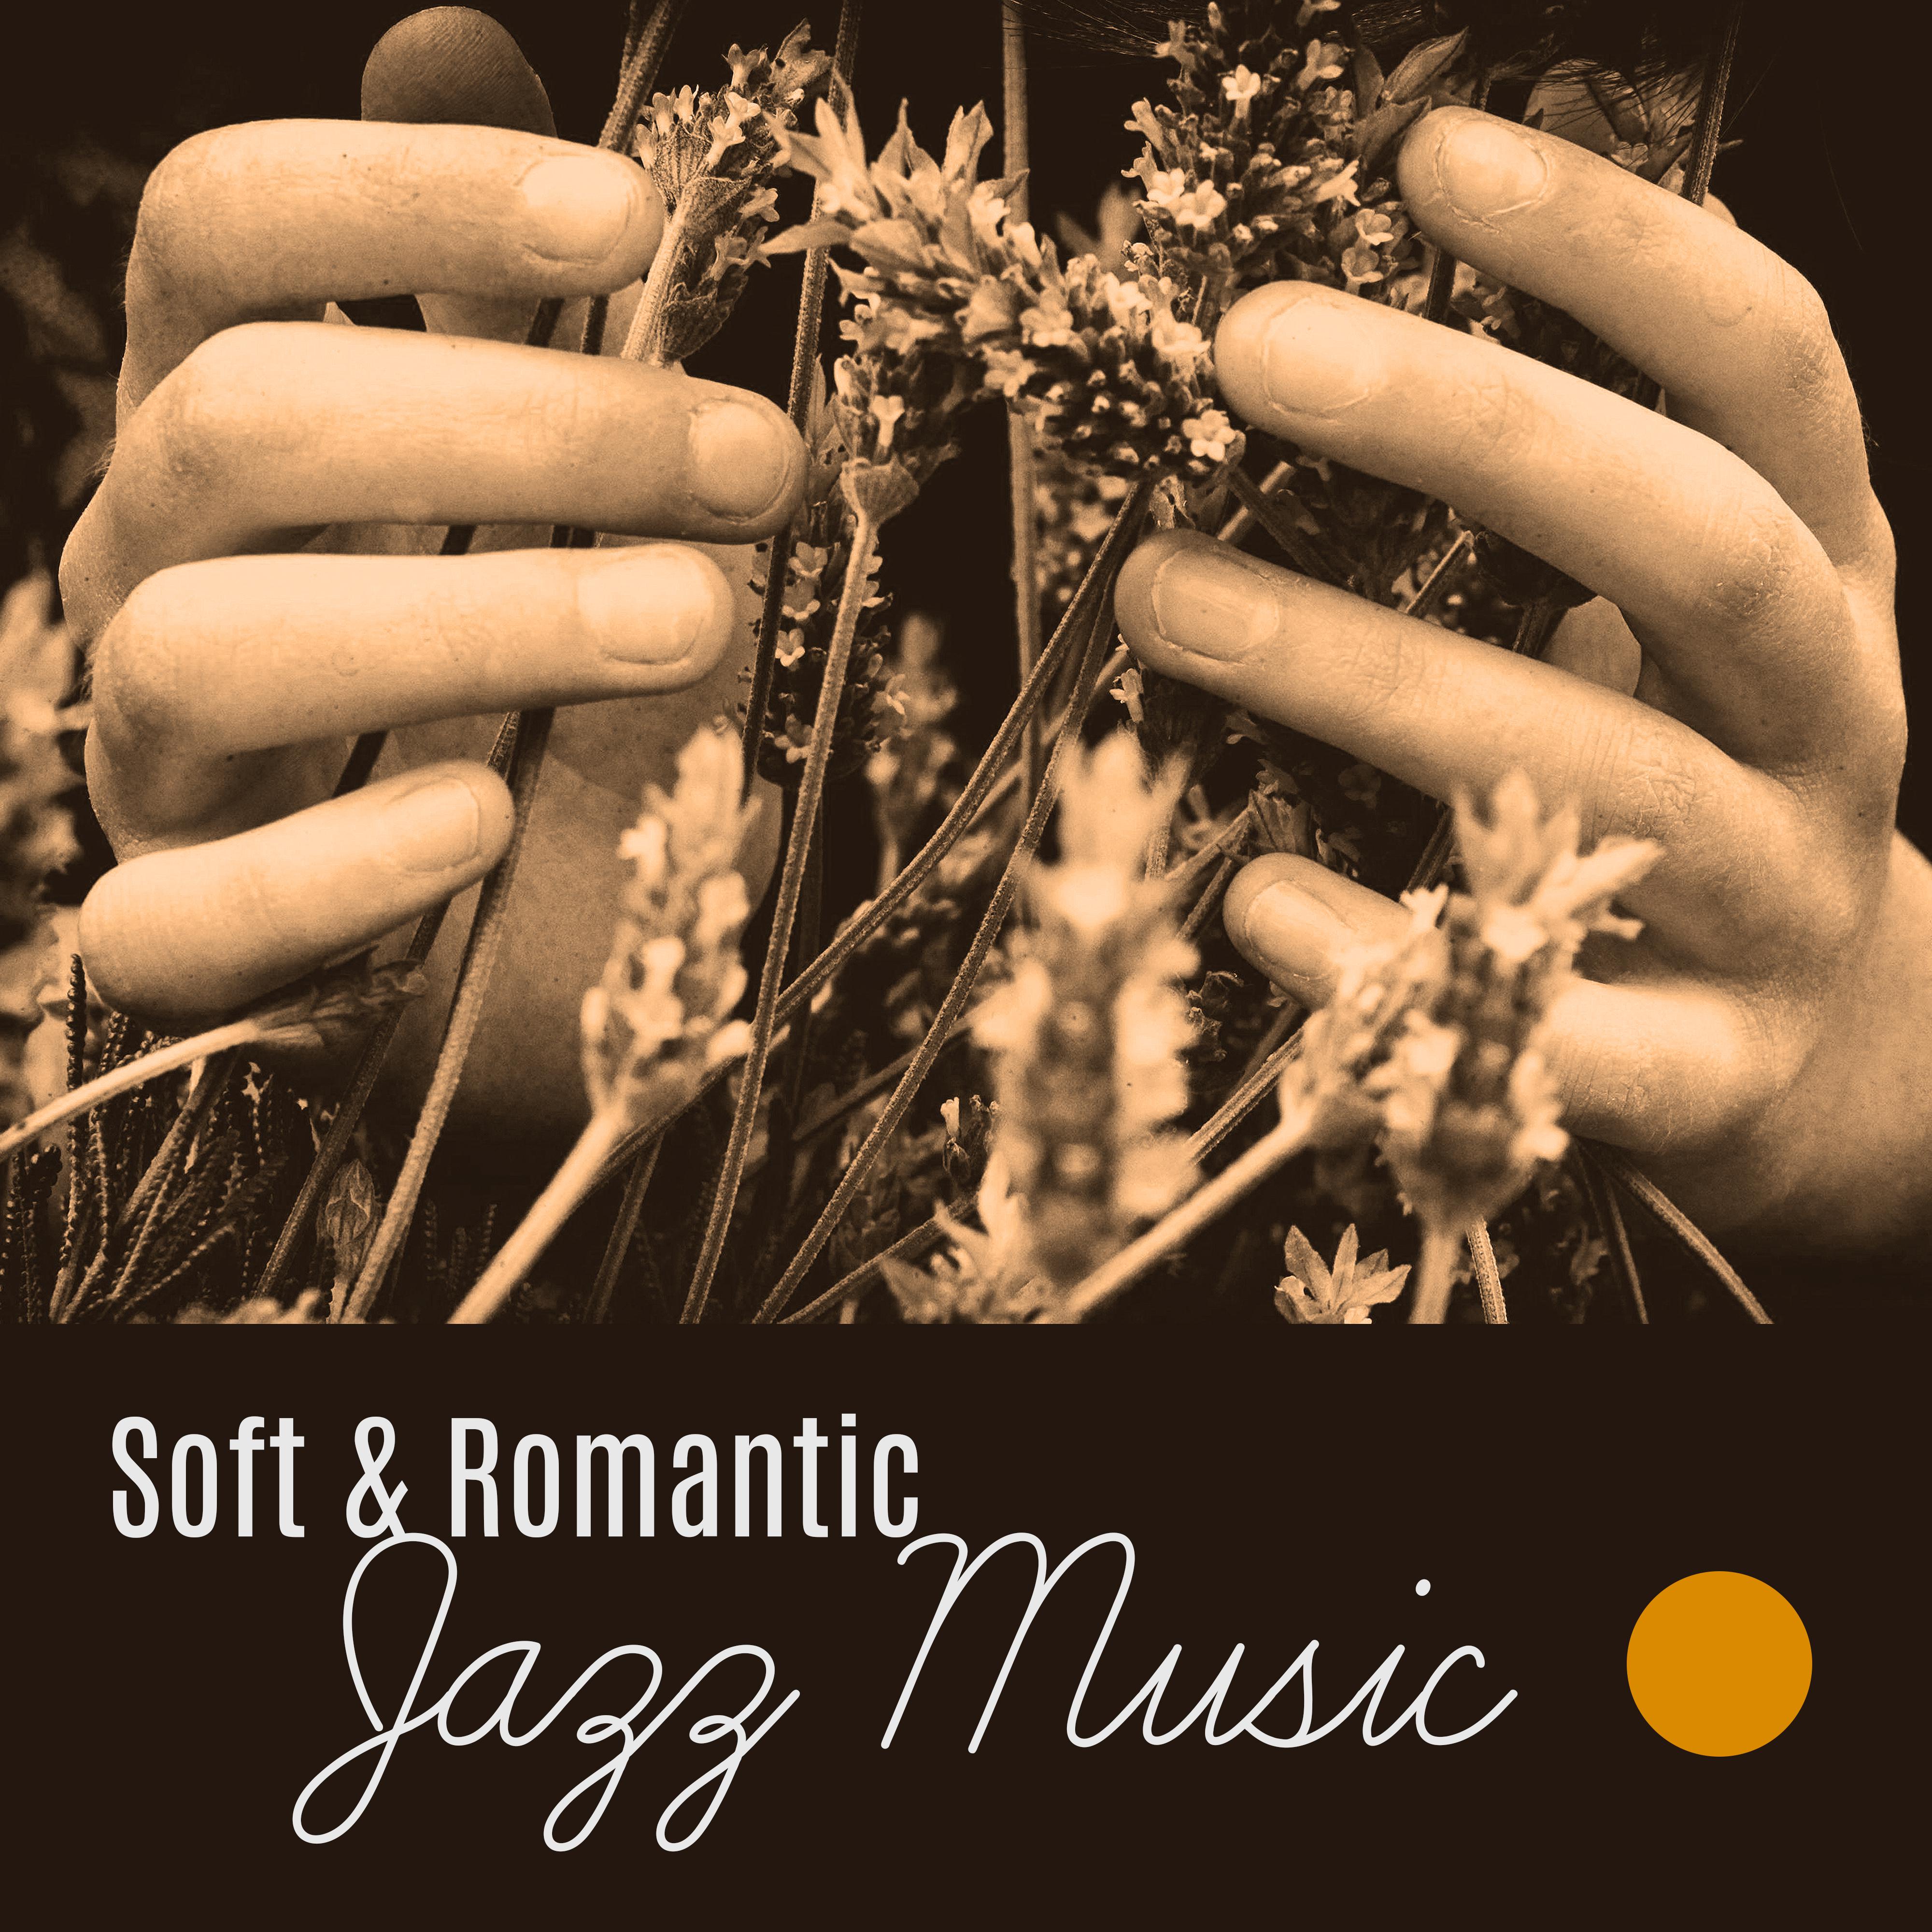 Soft  Romantic Jazz Music  Relaxing Jazz, Erotic Sounds, Peaceful Music for Lovers